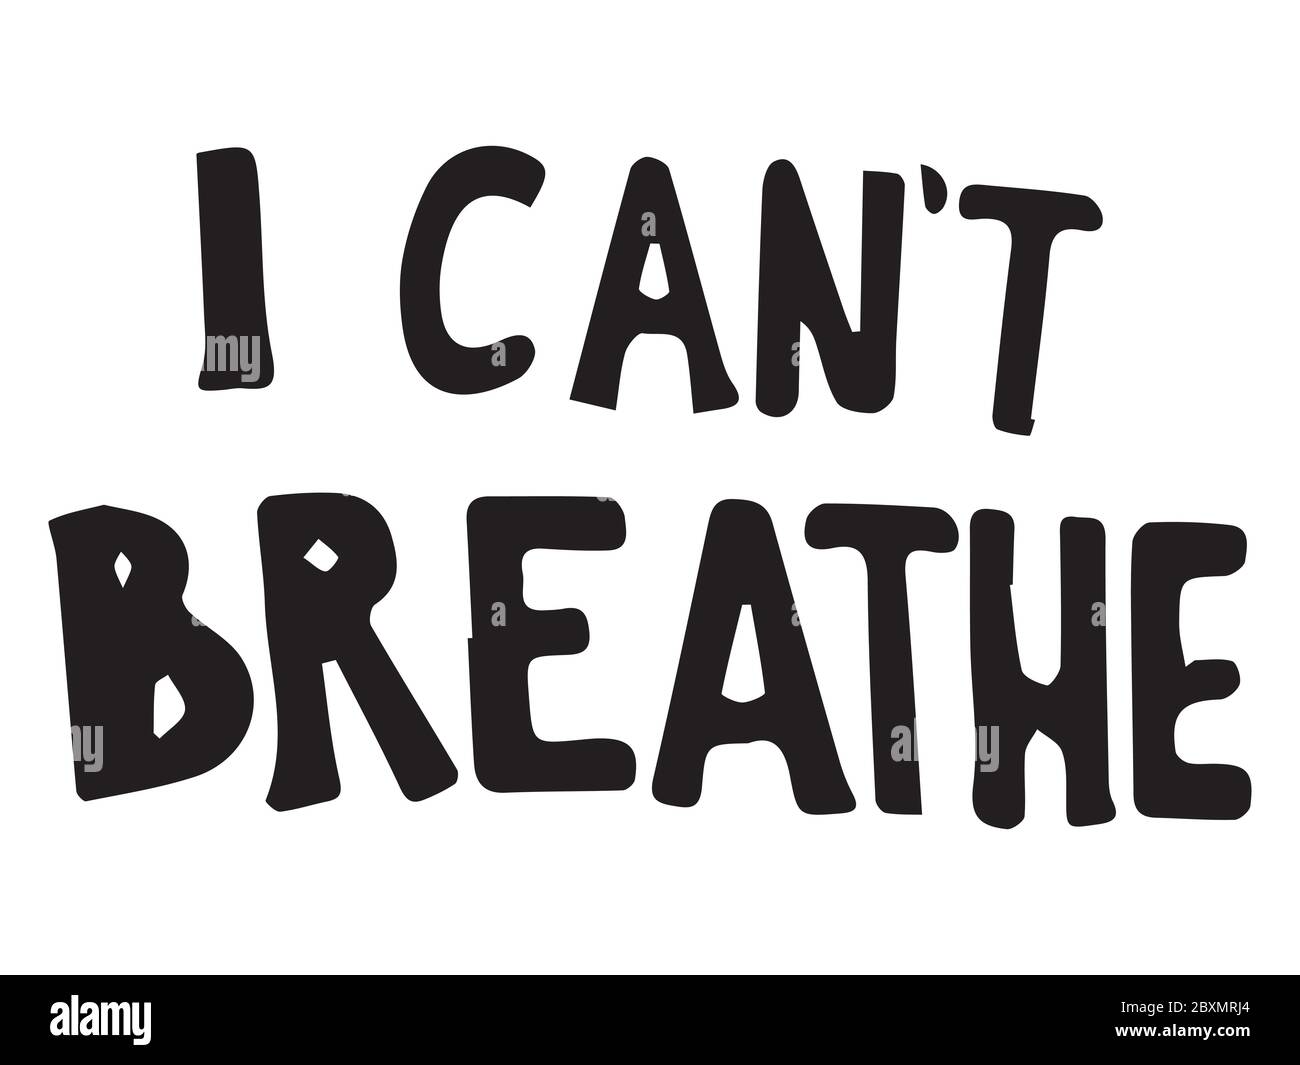 I Can't Breathe Text. Poster text depicting words of I can't Breathe. BLM Black Lives Matter. Black and white EPS Vector File. Stock Vector